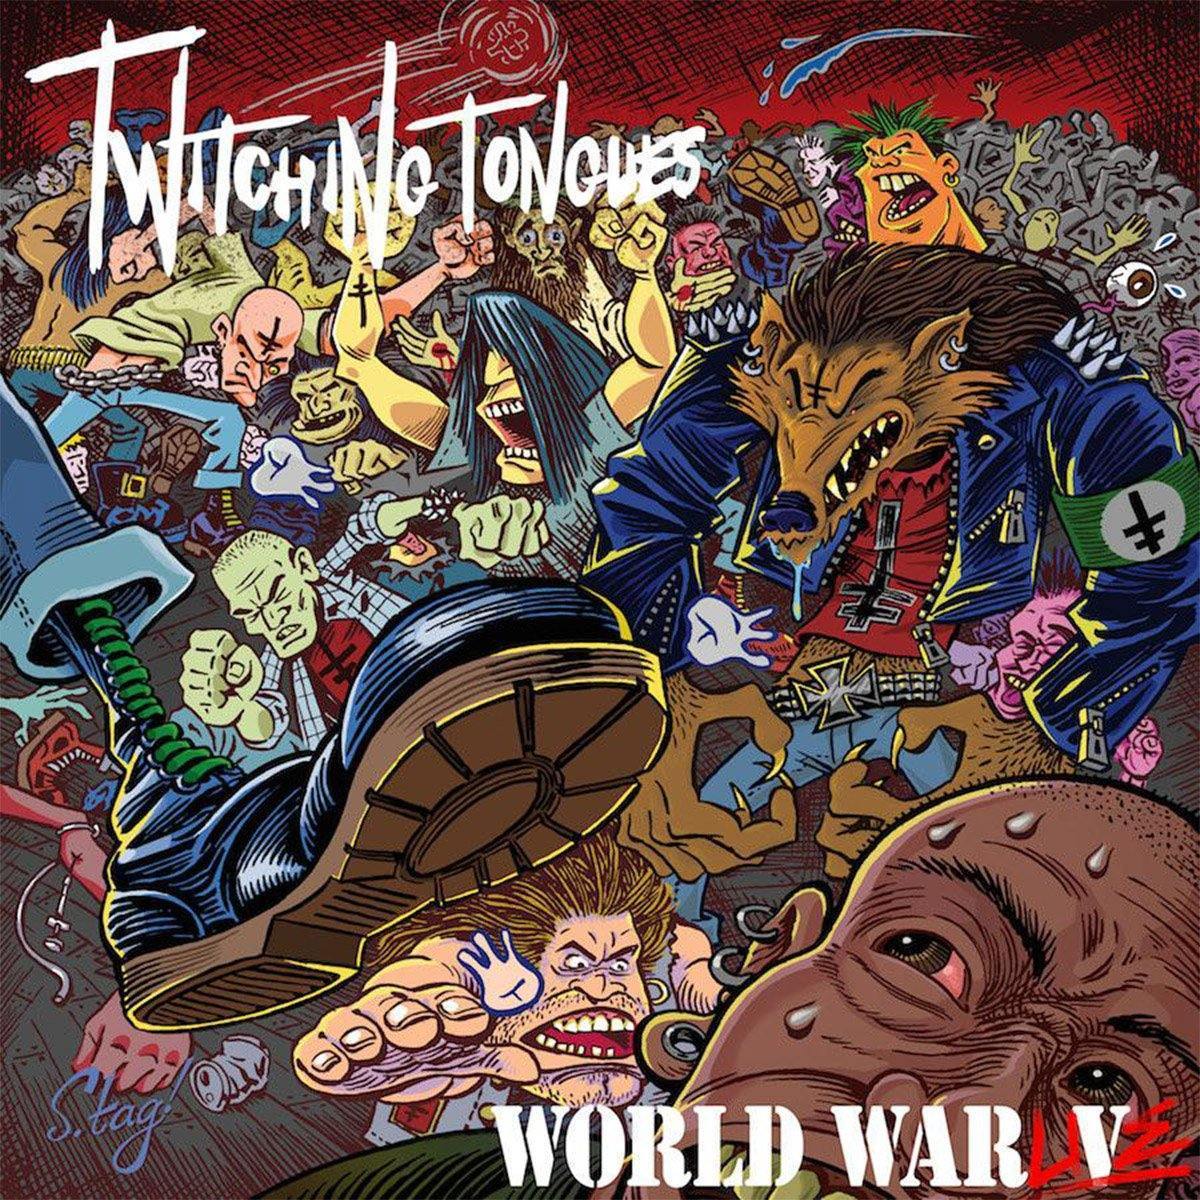 Buy – Twitching Tongues "World War Live" CD – Band & Music Merch – Cold Cuts Merch